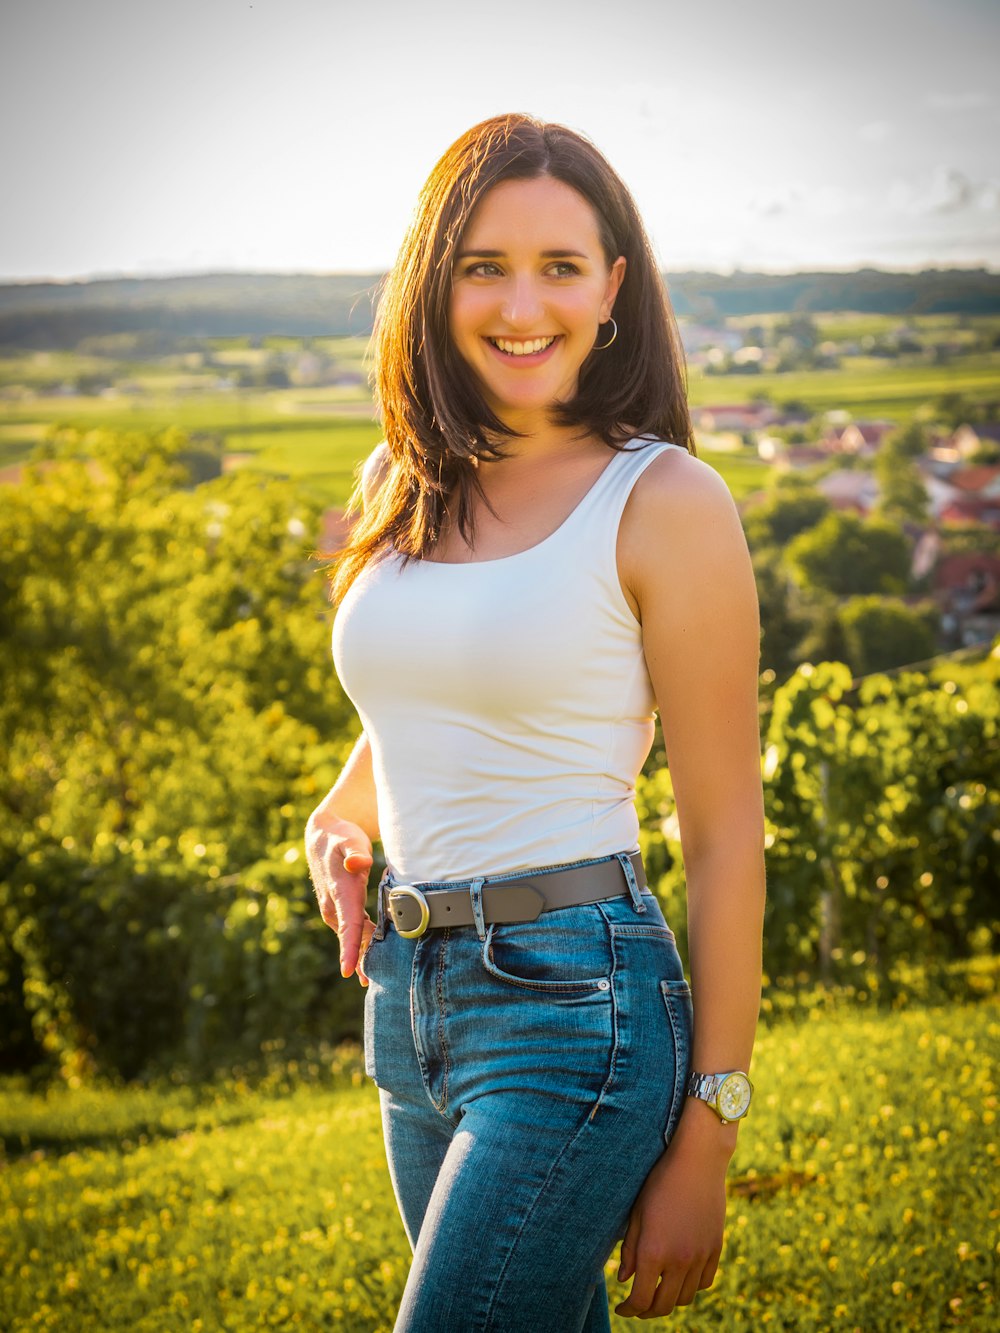 woman in white tank top and blue denim shorts standing on green grass field during daytime